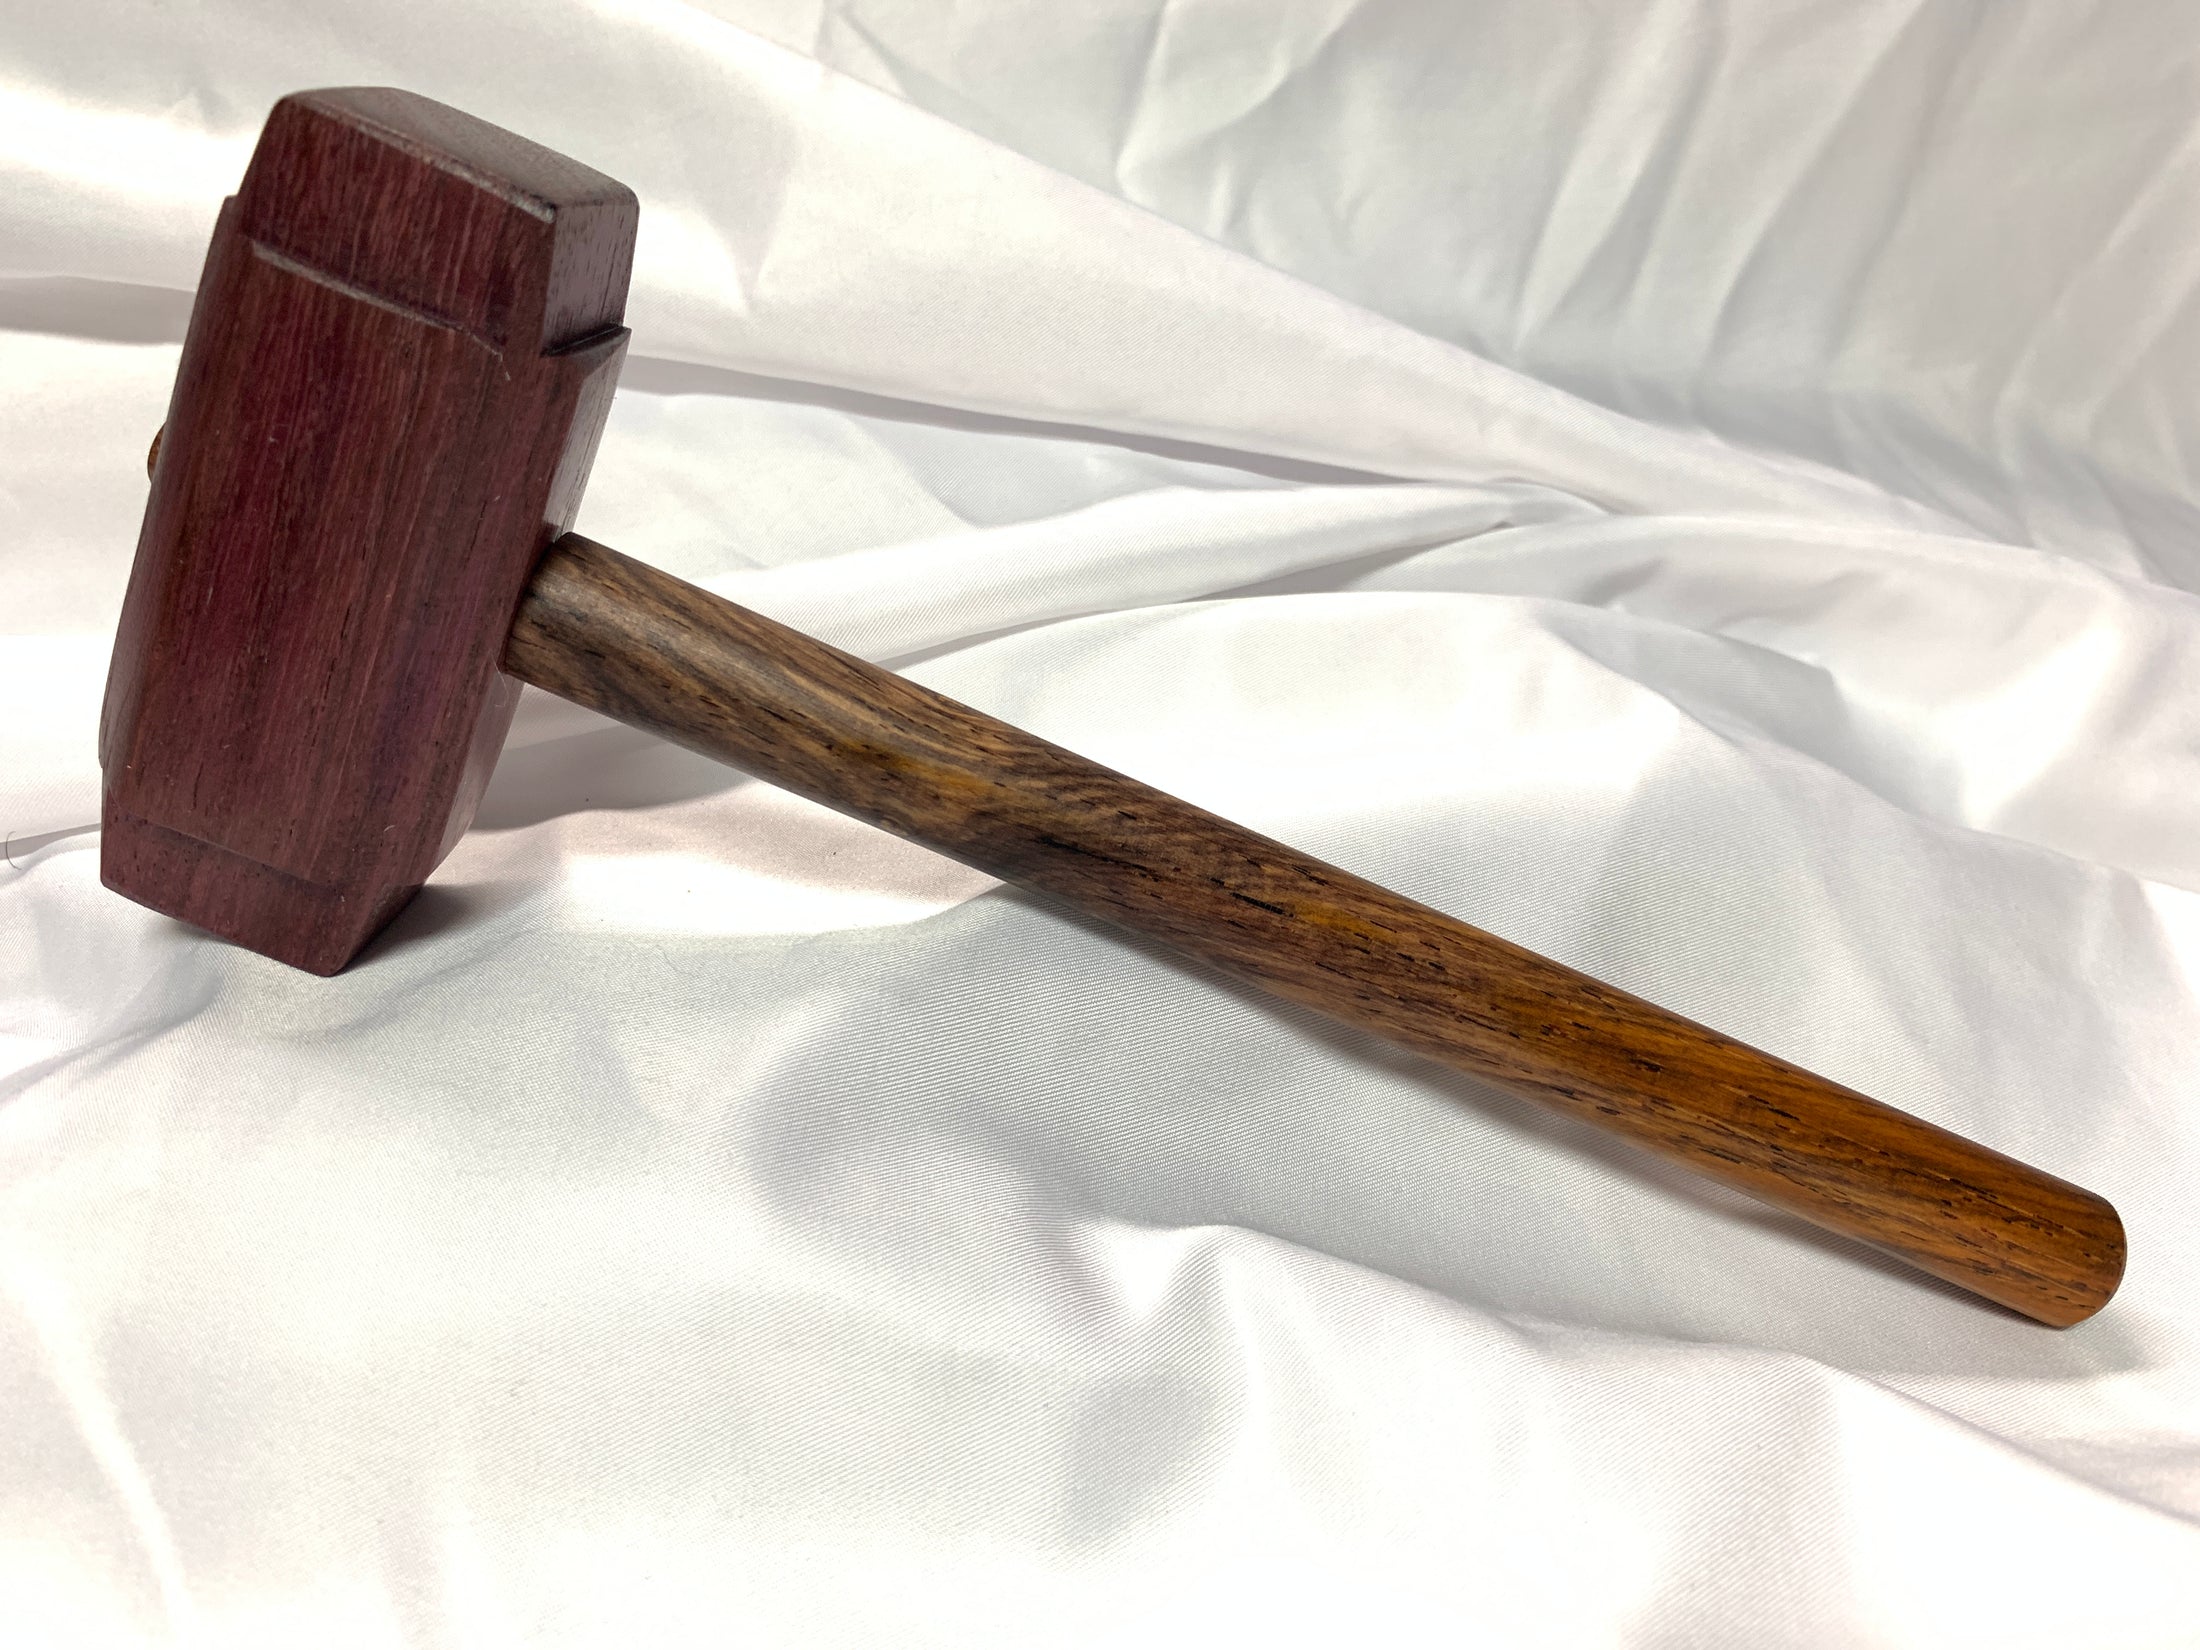 Thors Hammer Woodworking Mallet Purpleheart Head with Cocobolo Handle Kings Fine Woodworking